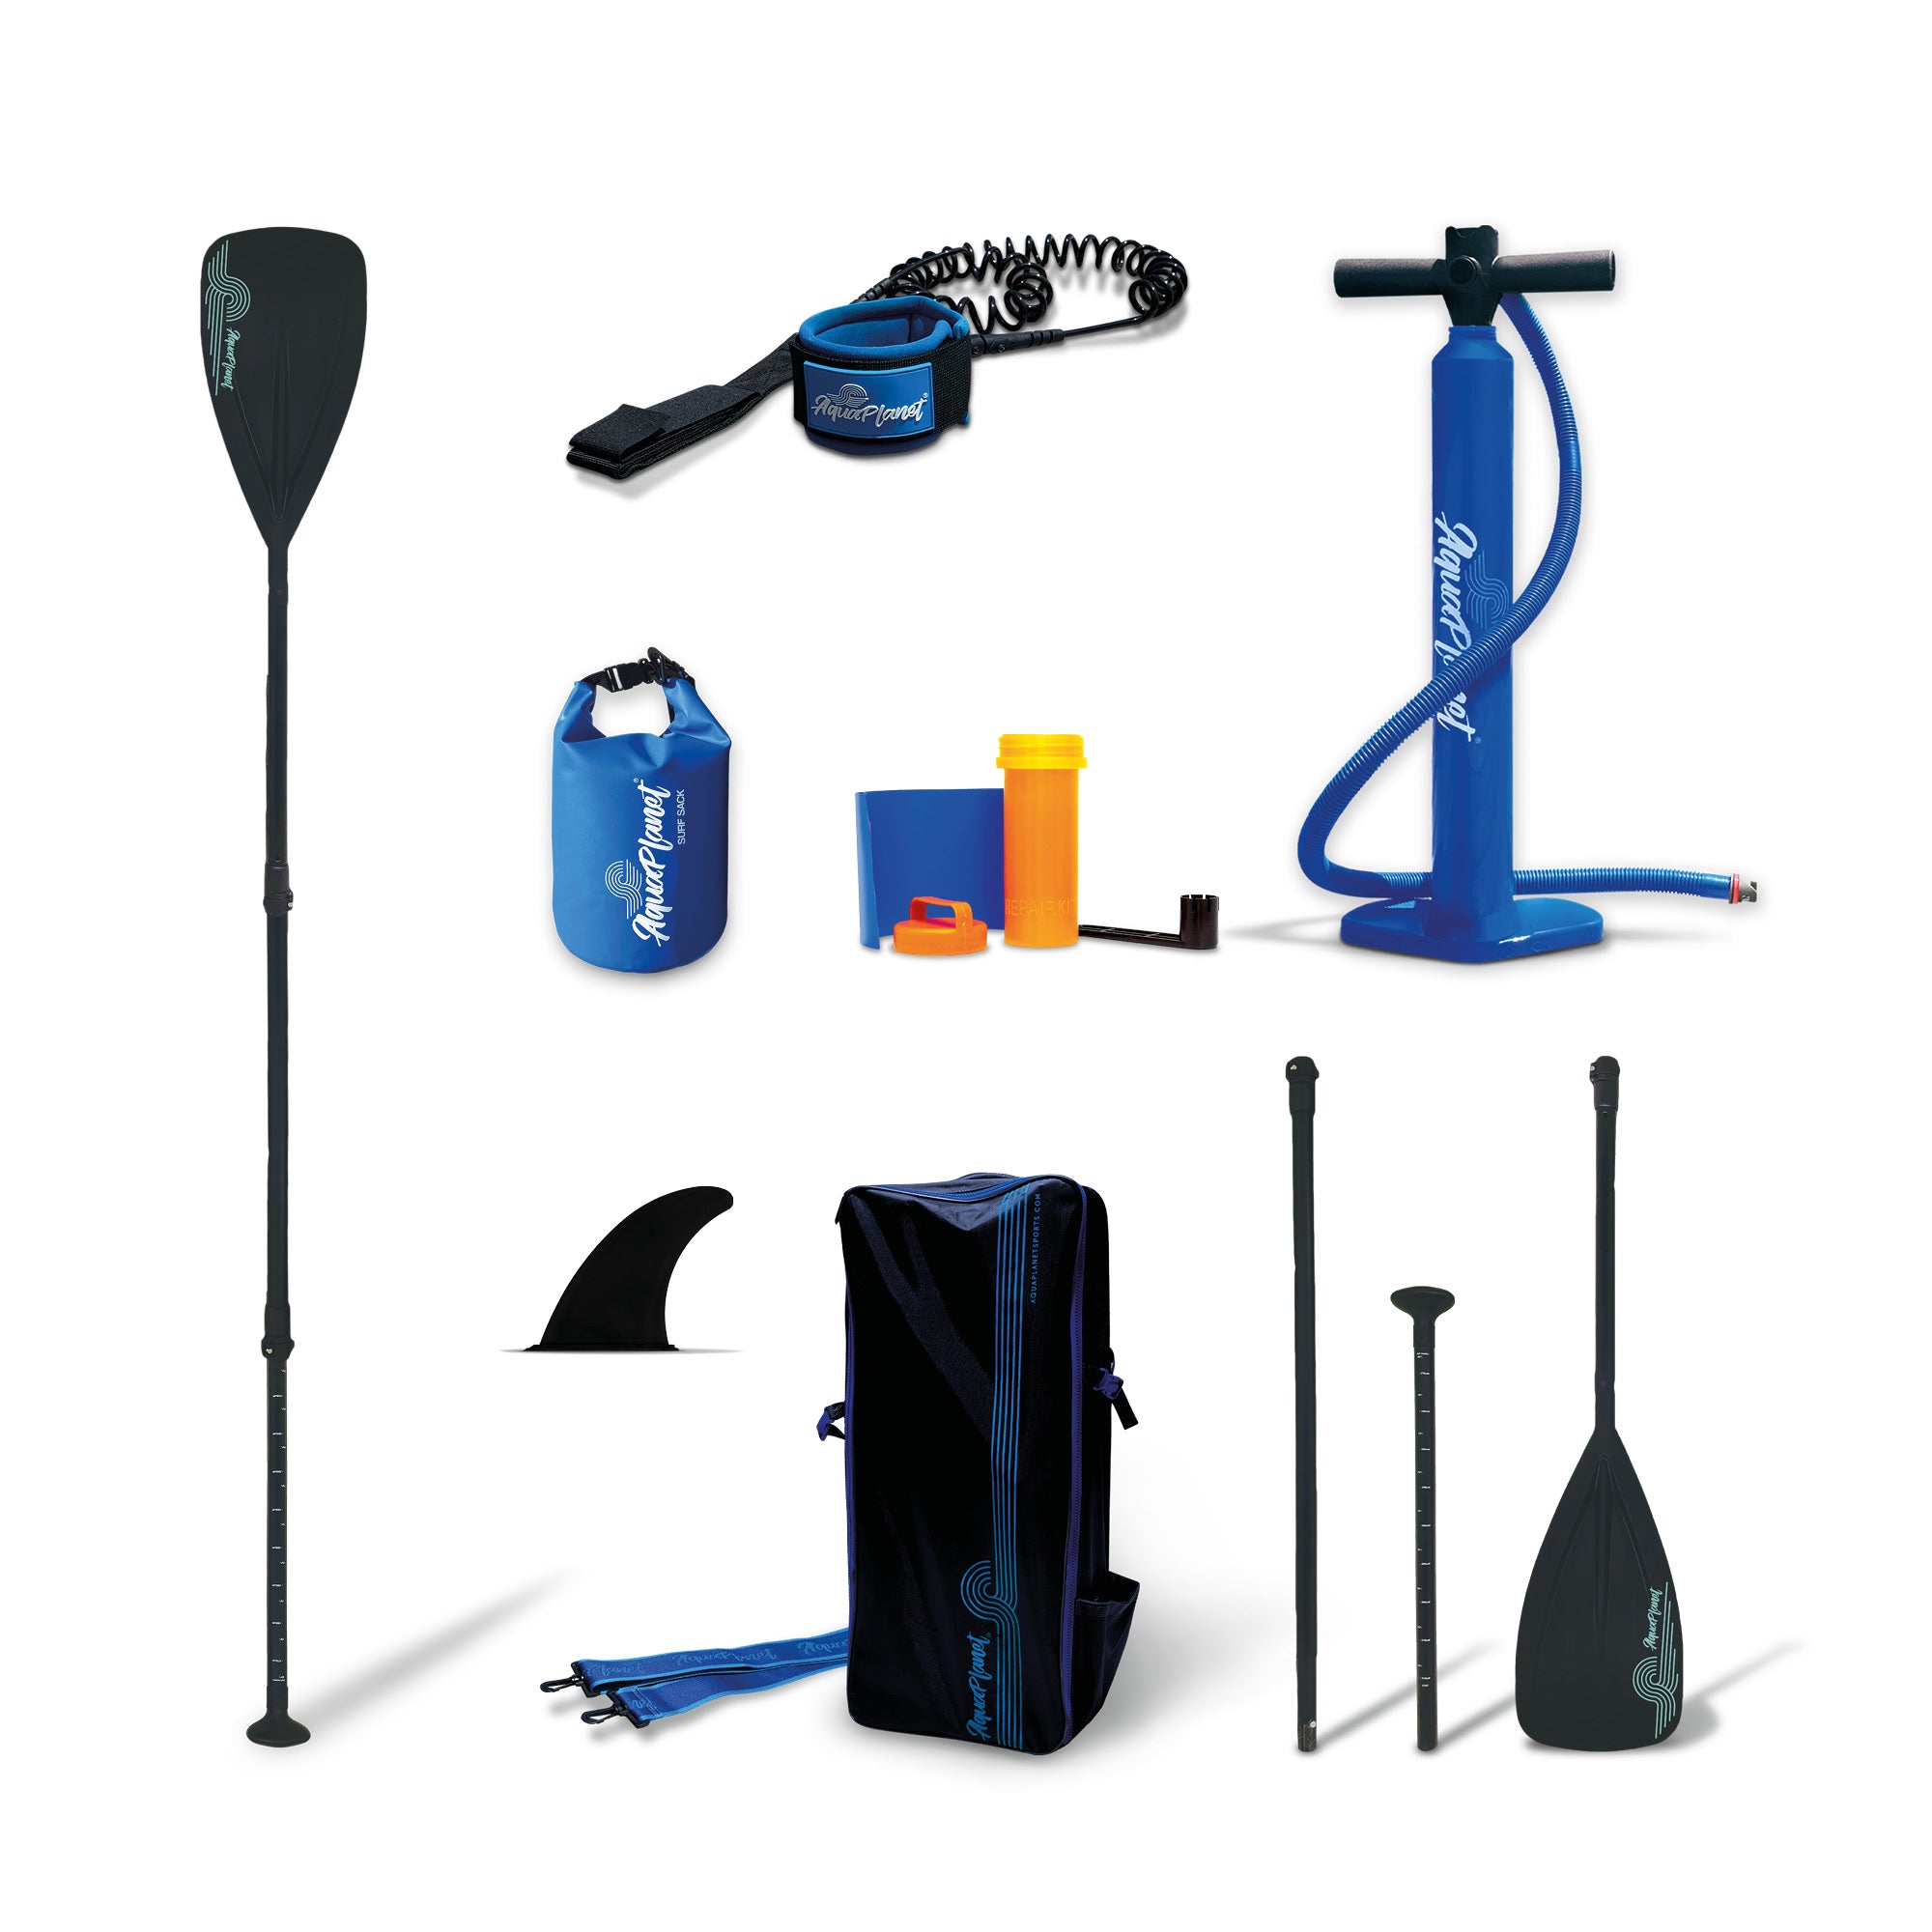 Everything included with the Aquaplanet Max 10'6" iSUP Inflatable Stand Up Paddleboard Set